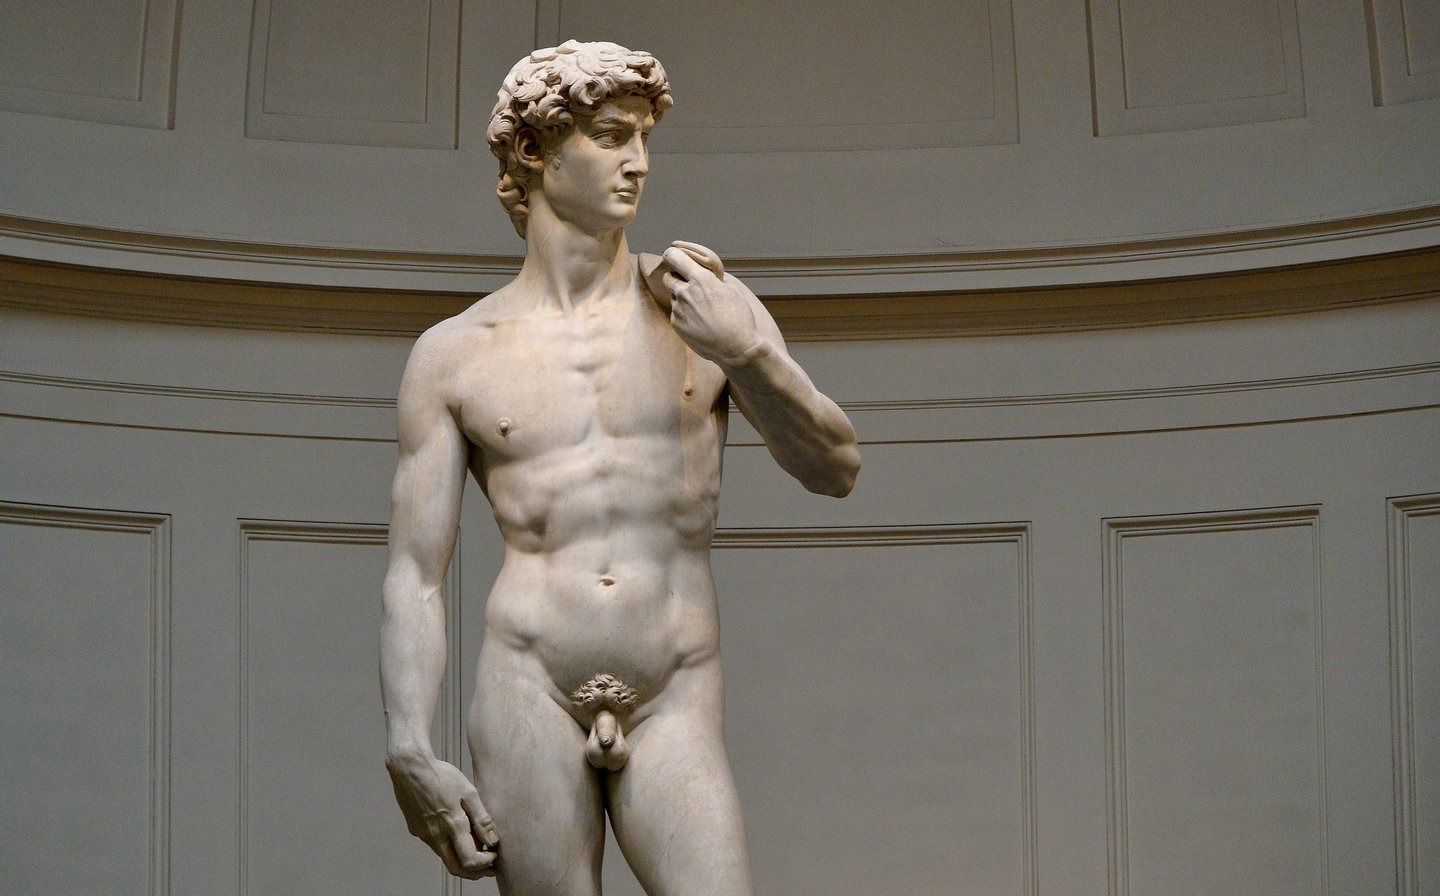 The original 16th century statue of David by Italian artist Michelangelo Buonarroti stands in the Galleria dell'Accademia in central Florence on January 23, 2015. AFP PHOTO / ALBERTO PIZZOLI (Photo credit should read ALBERTO PIZZOLI/AFP/Getty Images)